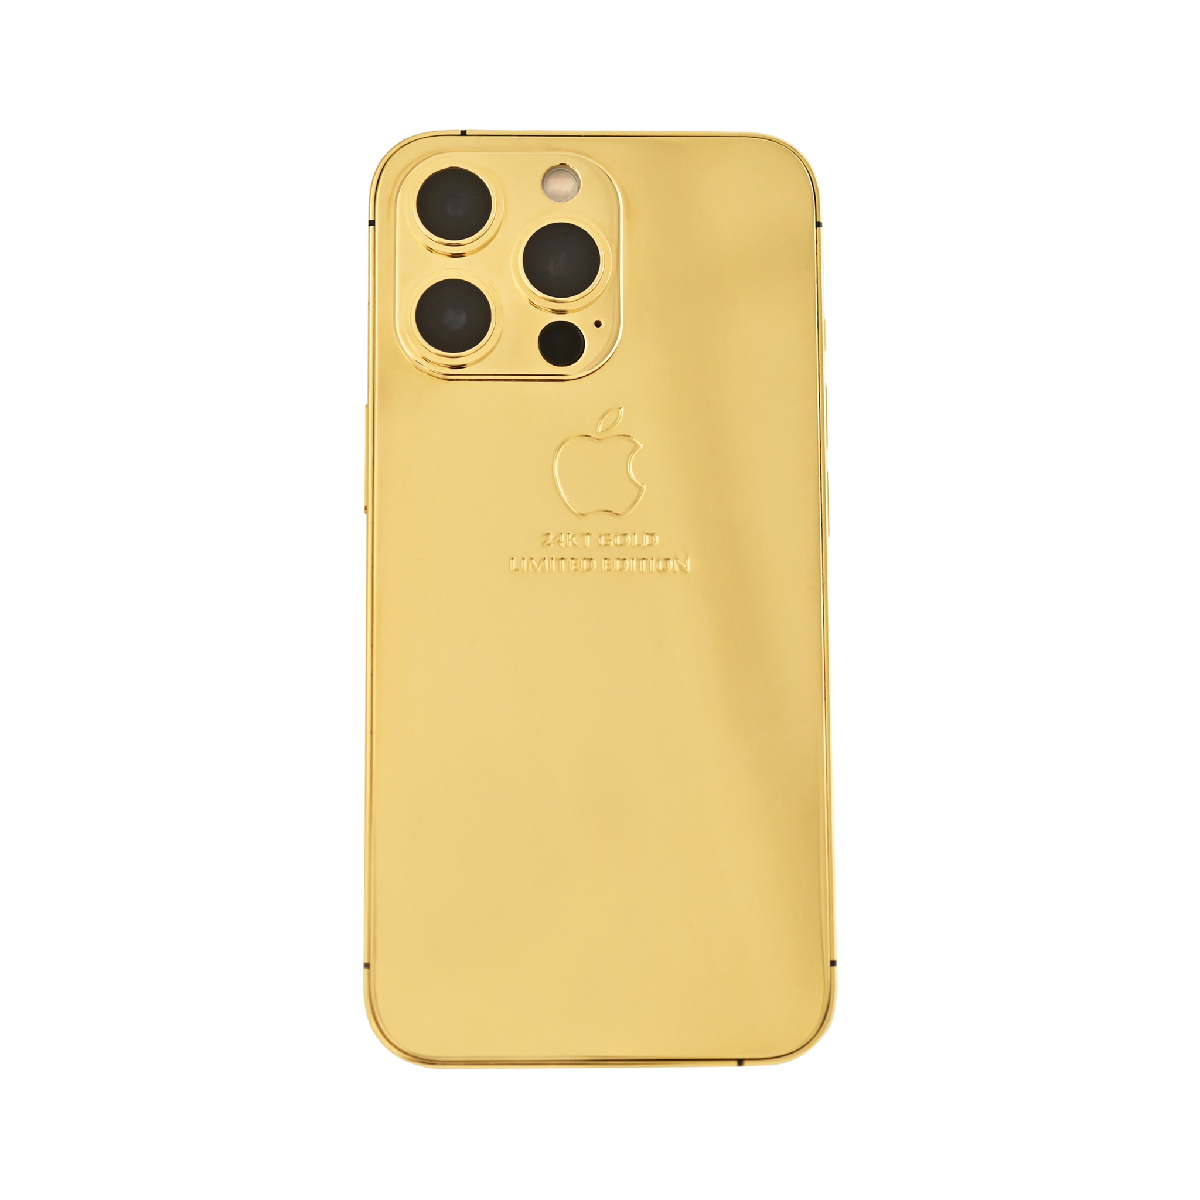 Caviar Luxury 24k Full Gold Customized iPhone 14 Pro 128 GB Limited Edition